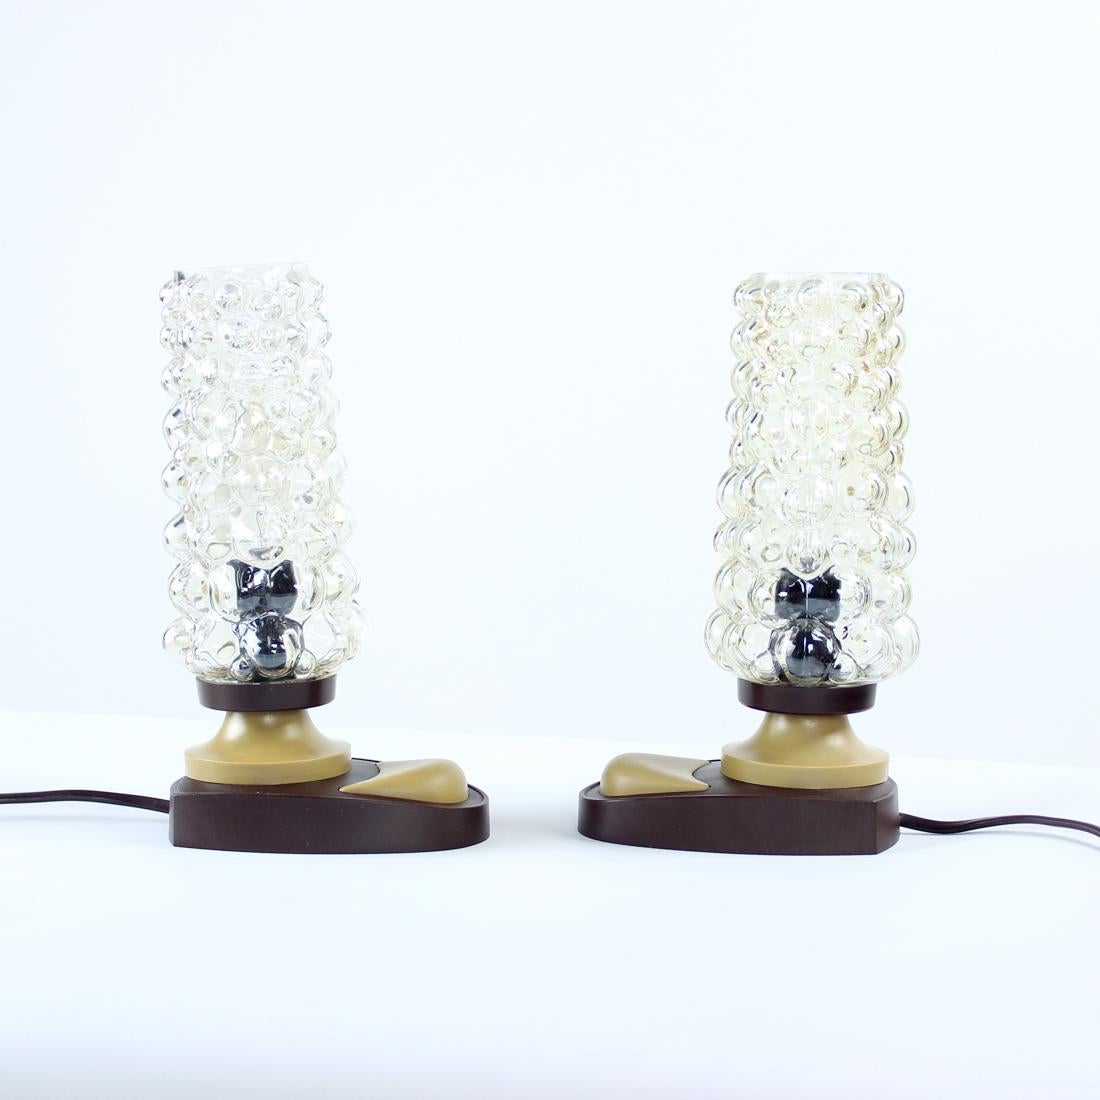 Mid-Century Table Lamps in Glass and Plastic, Czechoslovakia, 1960s For Sale 2